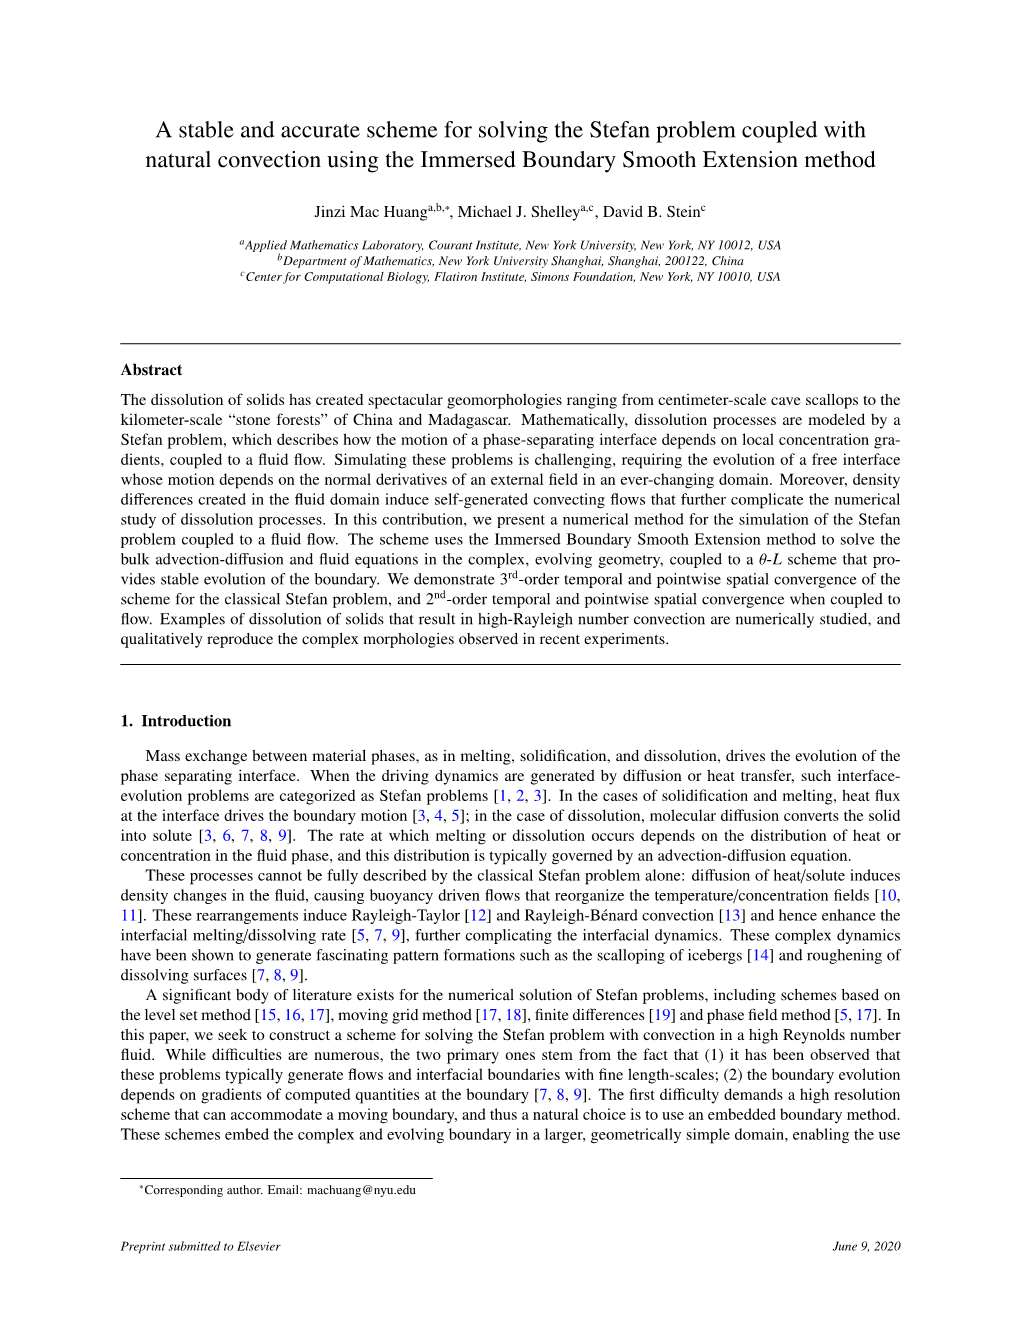 A Stable and Accurate Scheme for Solving the Stefan Problem Coupled with Natural Convection Using the Immersed Boundary Smooth Extension Method